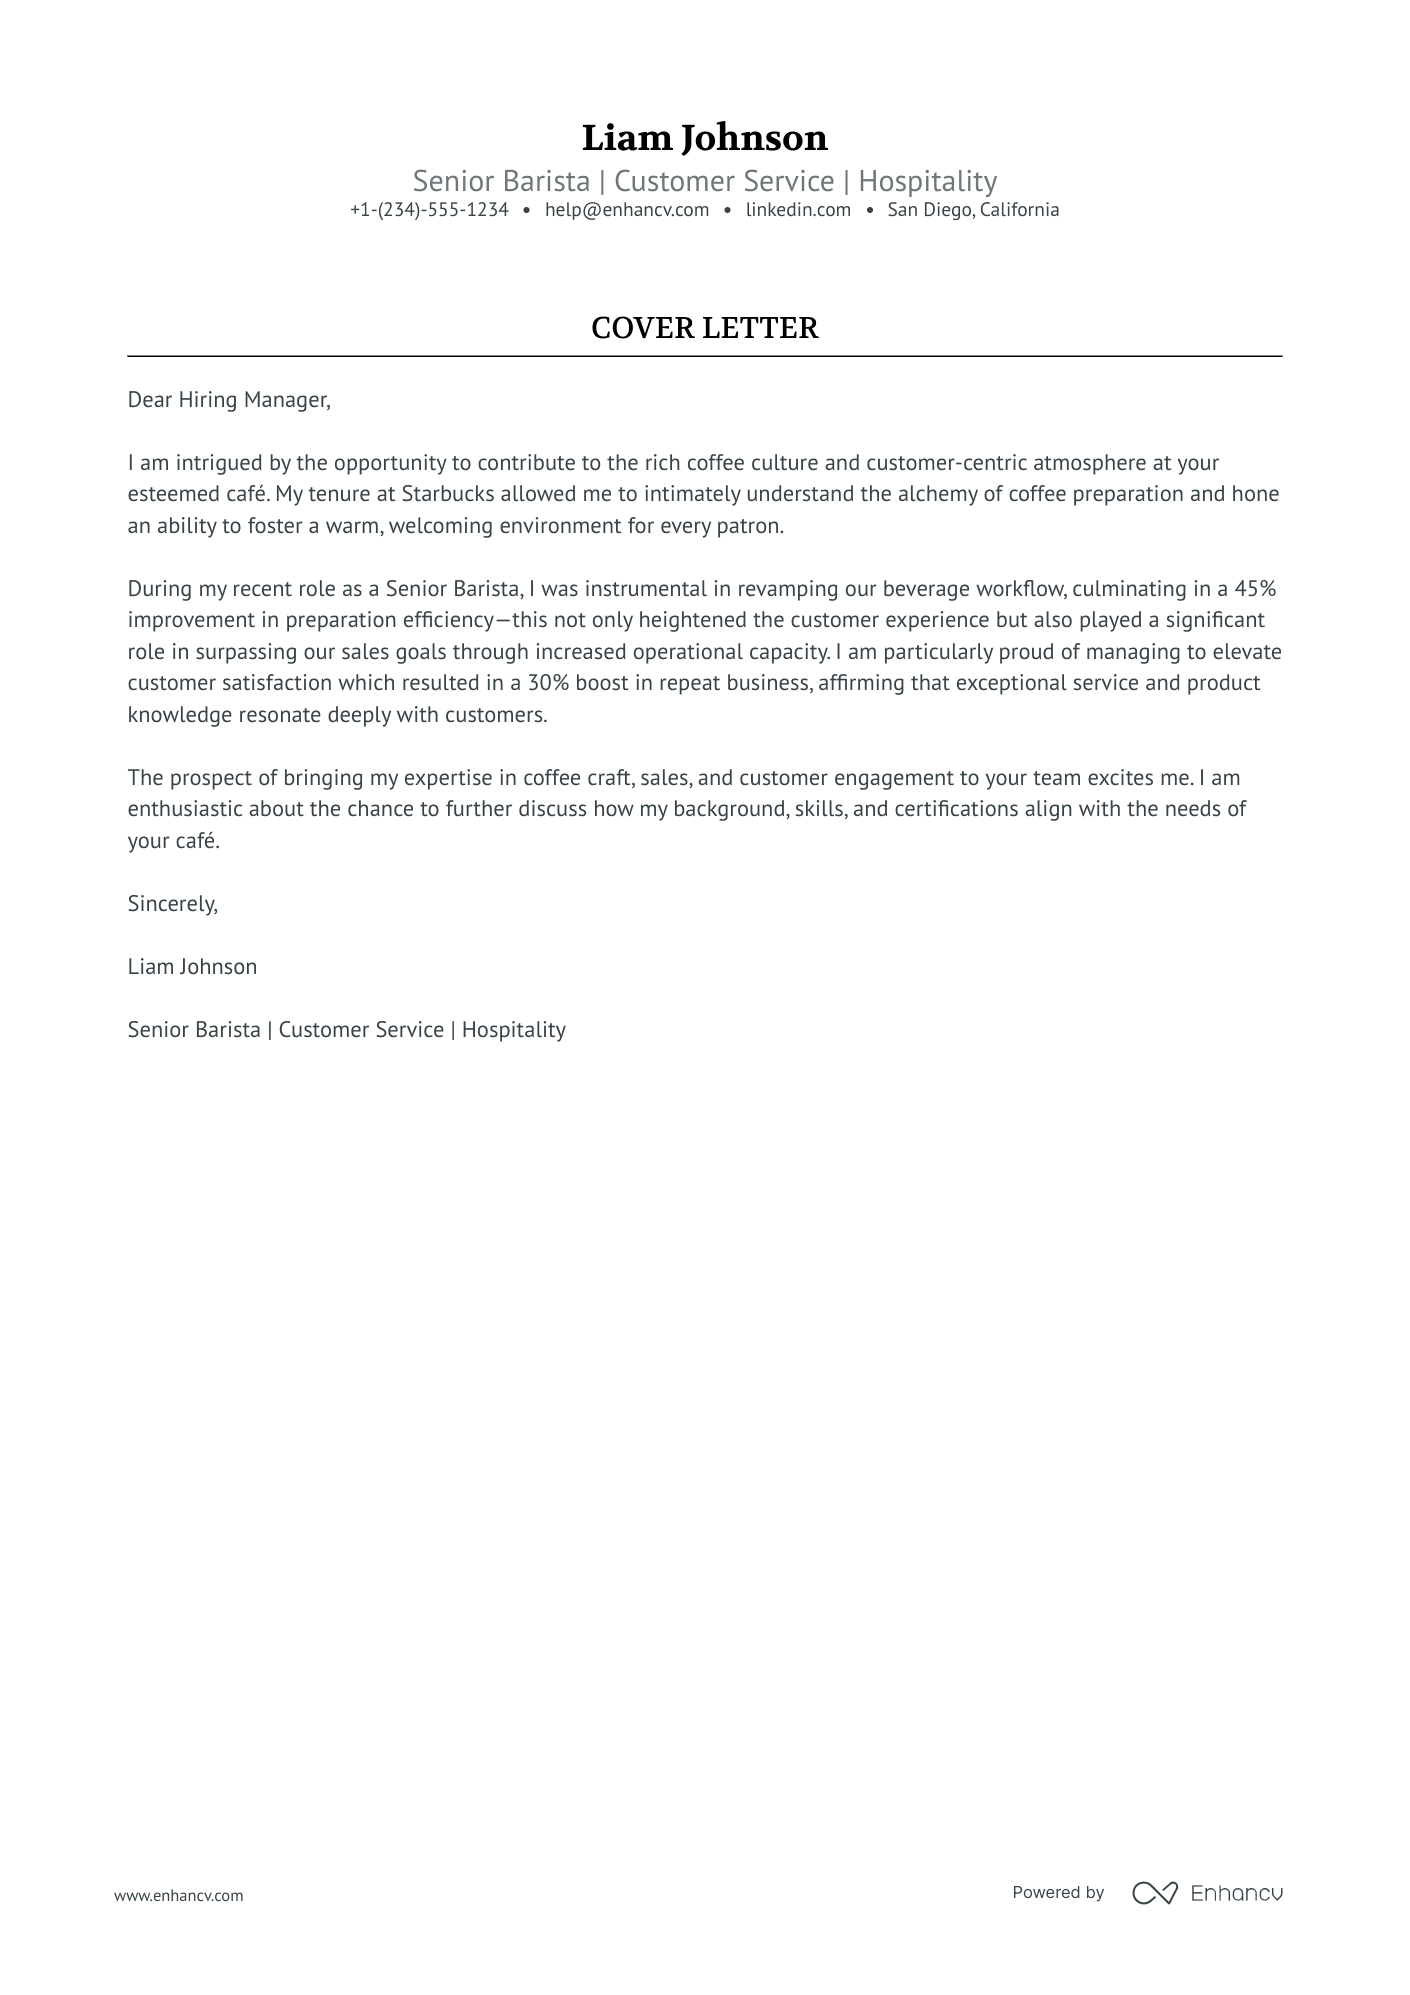 barista cover letter example